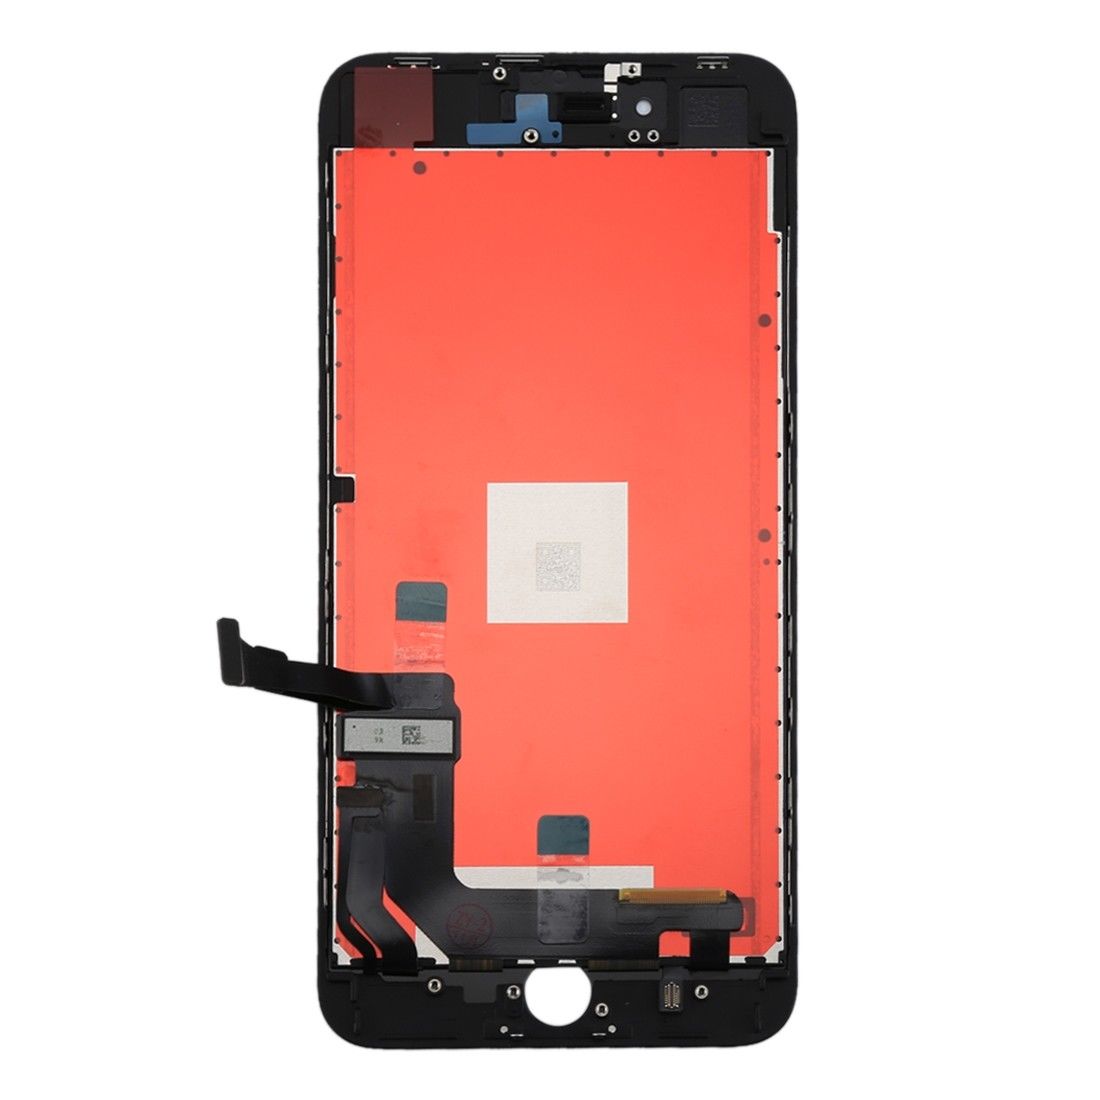 Apple iPhone 8 4.7" Replacement LCD Touch Screen Assembly - Black for [product_price] - First Help Tech